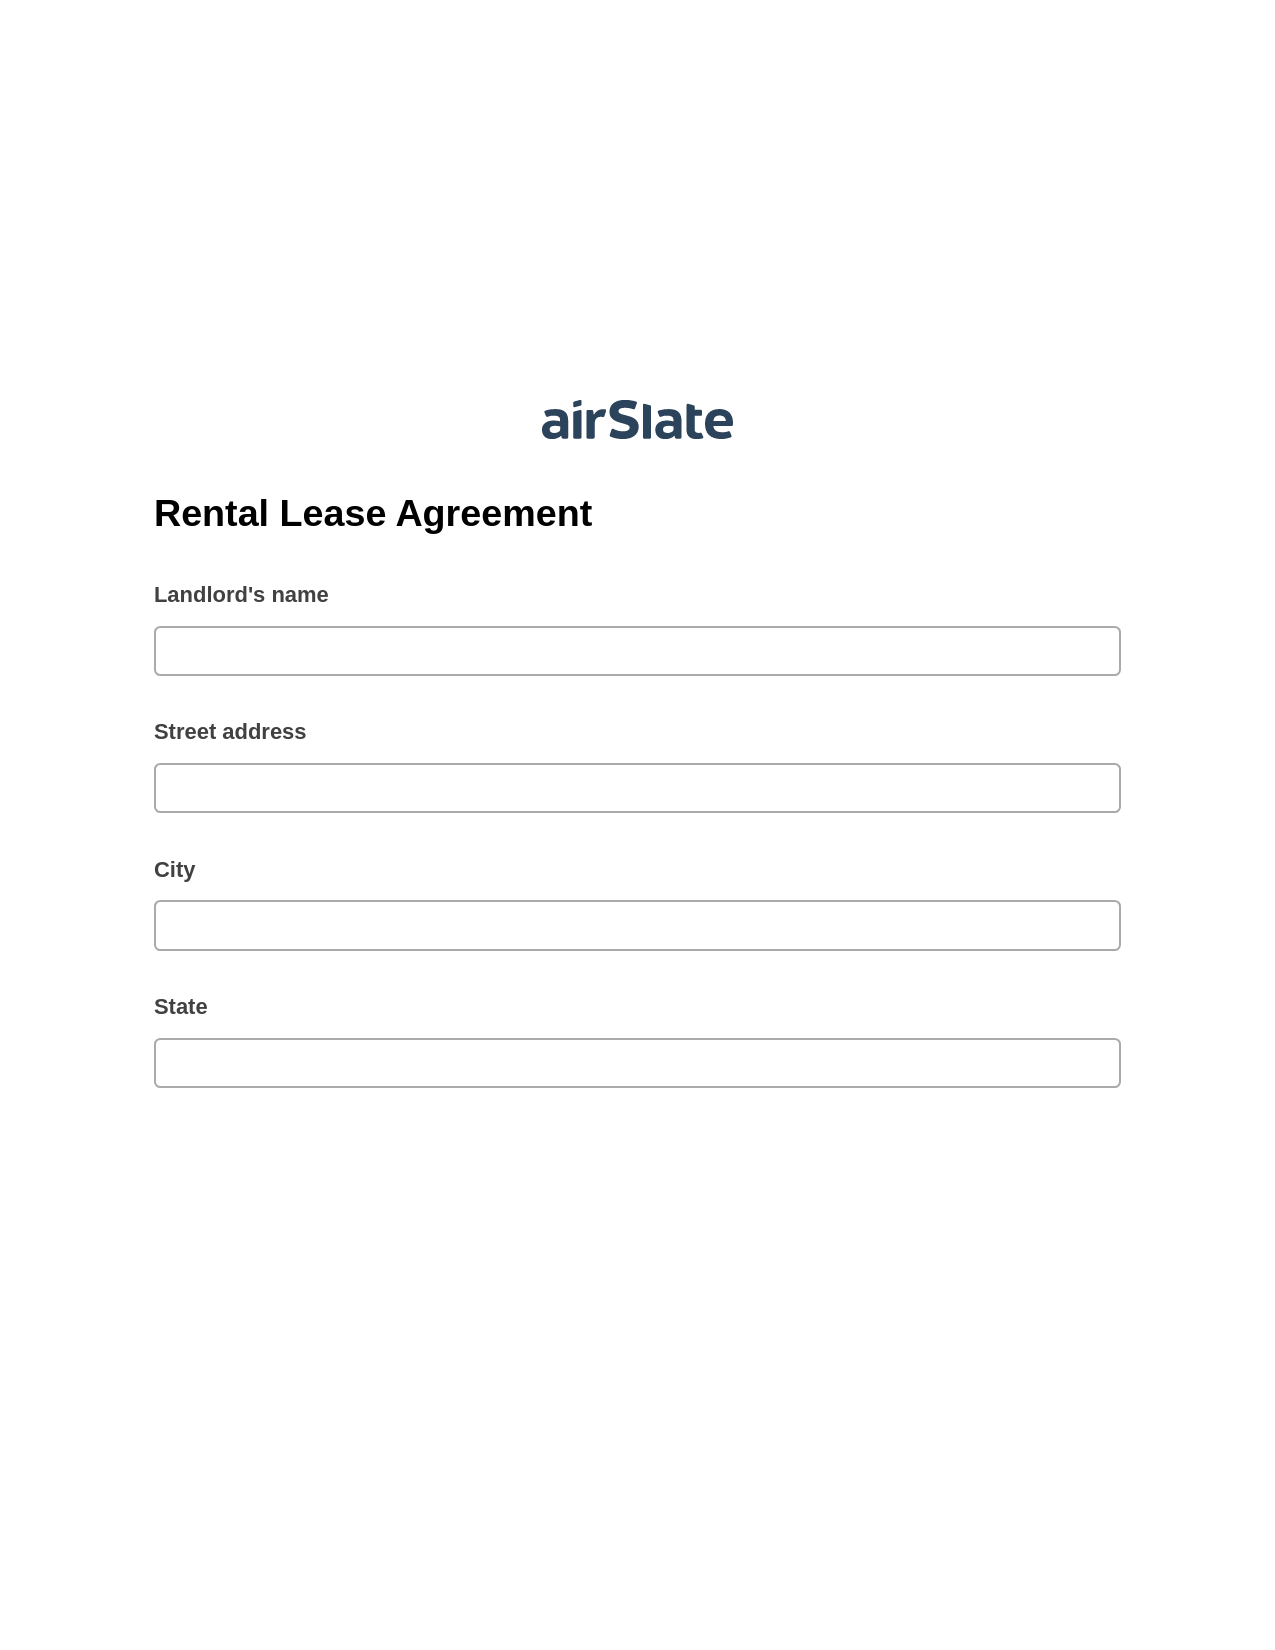 Rental Lease Agreement Pre-fill from CSV File Dropdown Options Bot, Google Cloud Print Bot, Export to NetSuite Record Bot